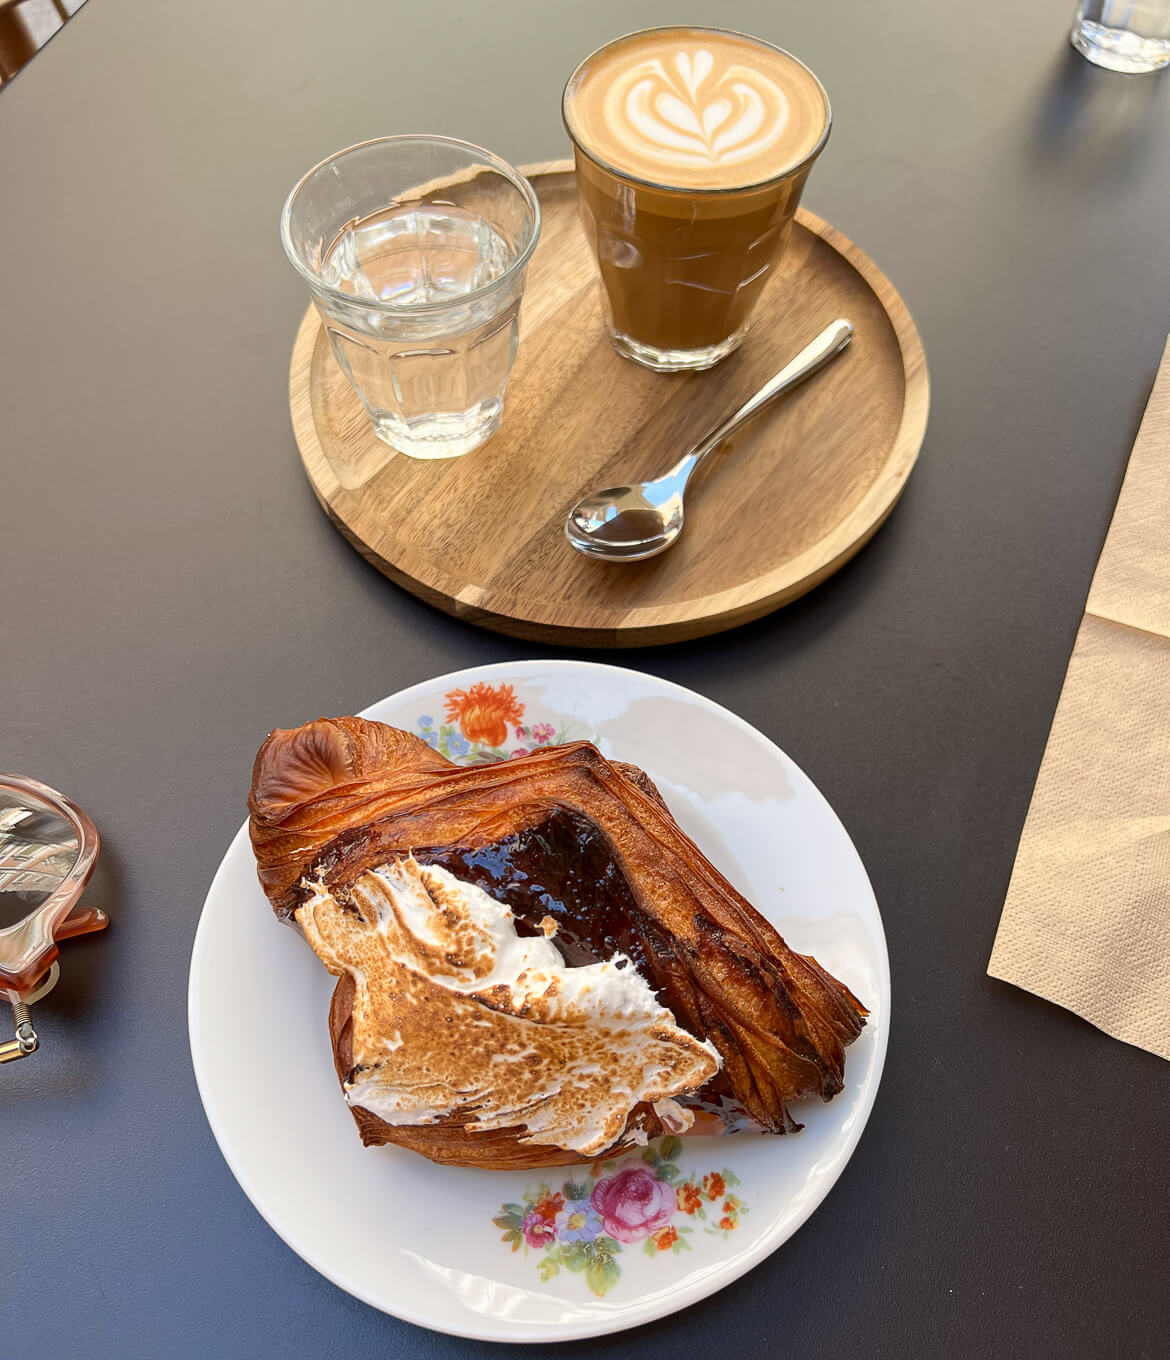 Coffee and pastries at Allegra, Bologna